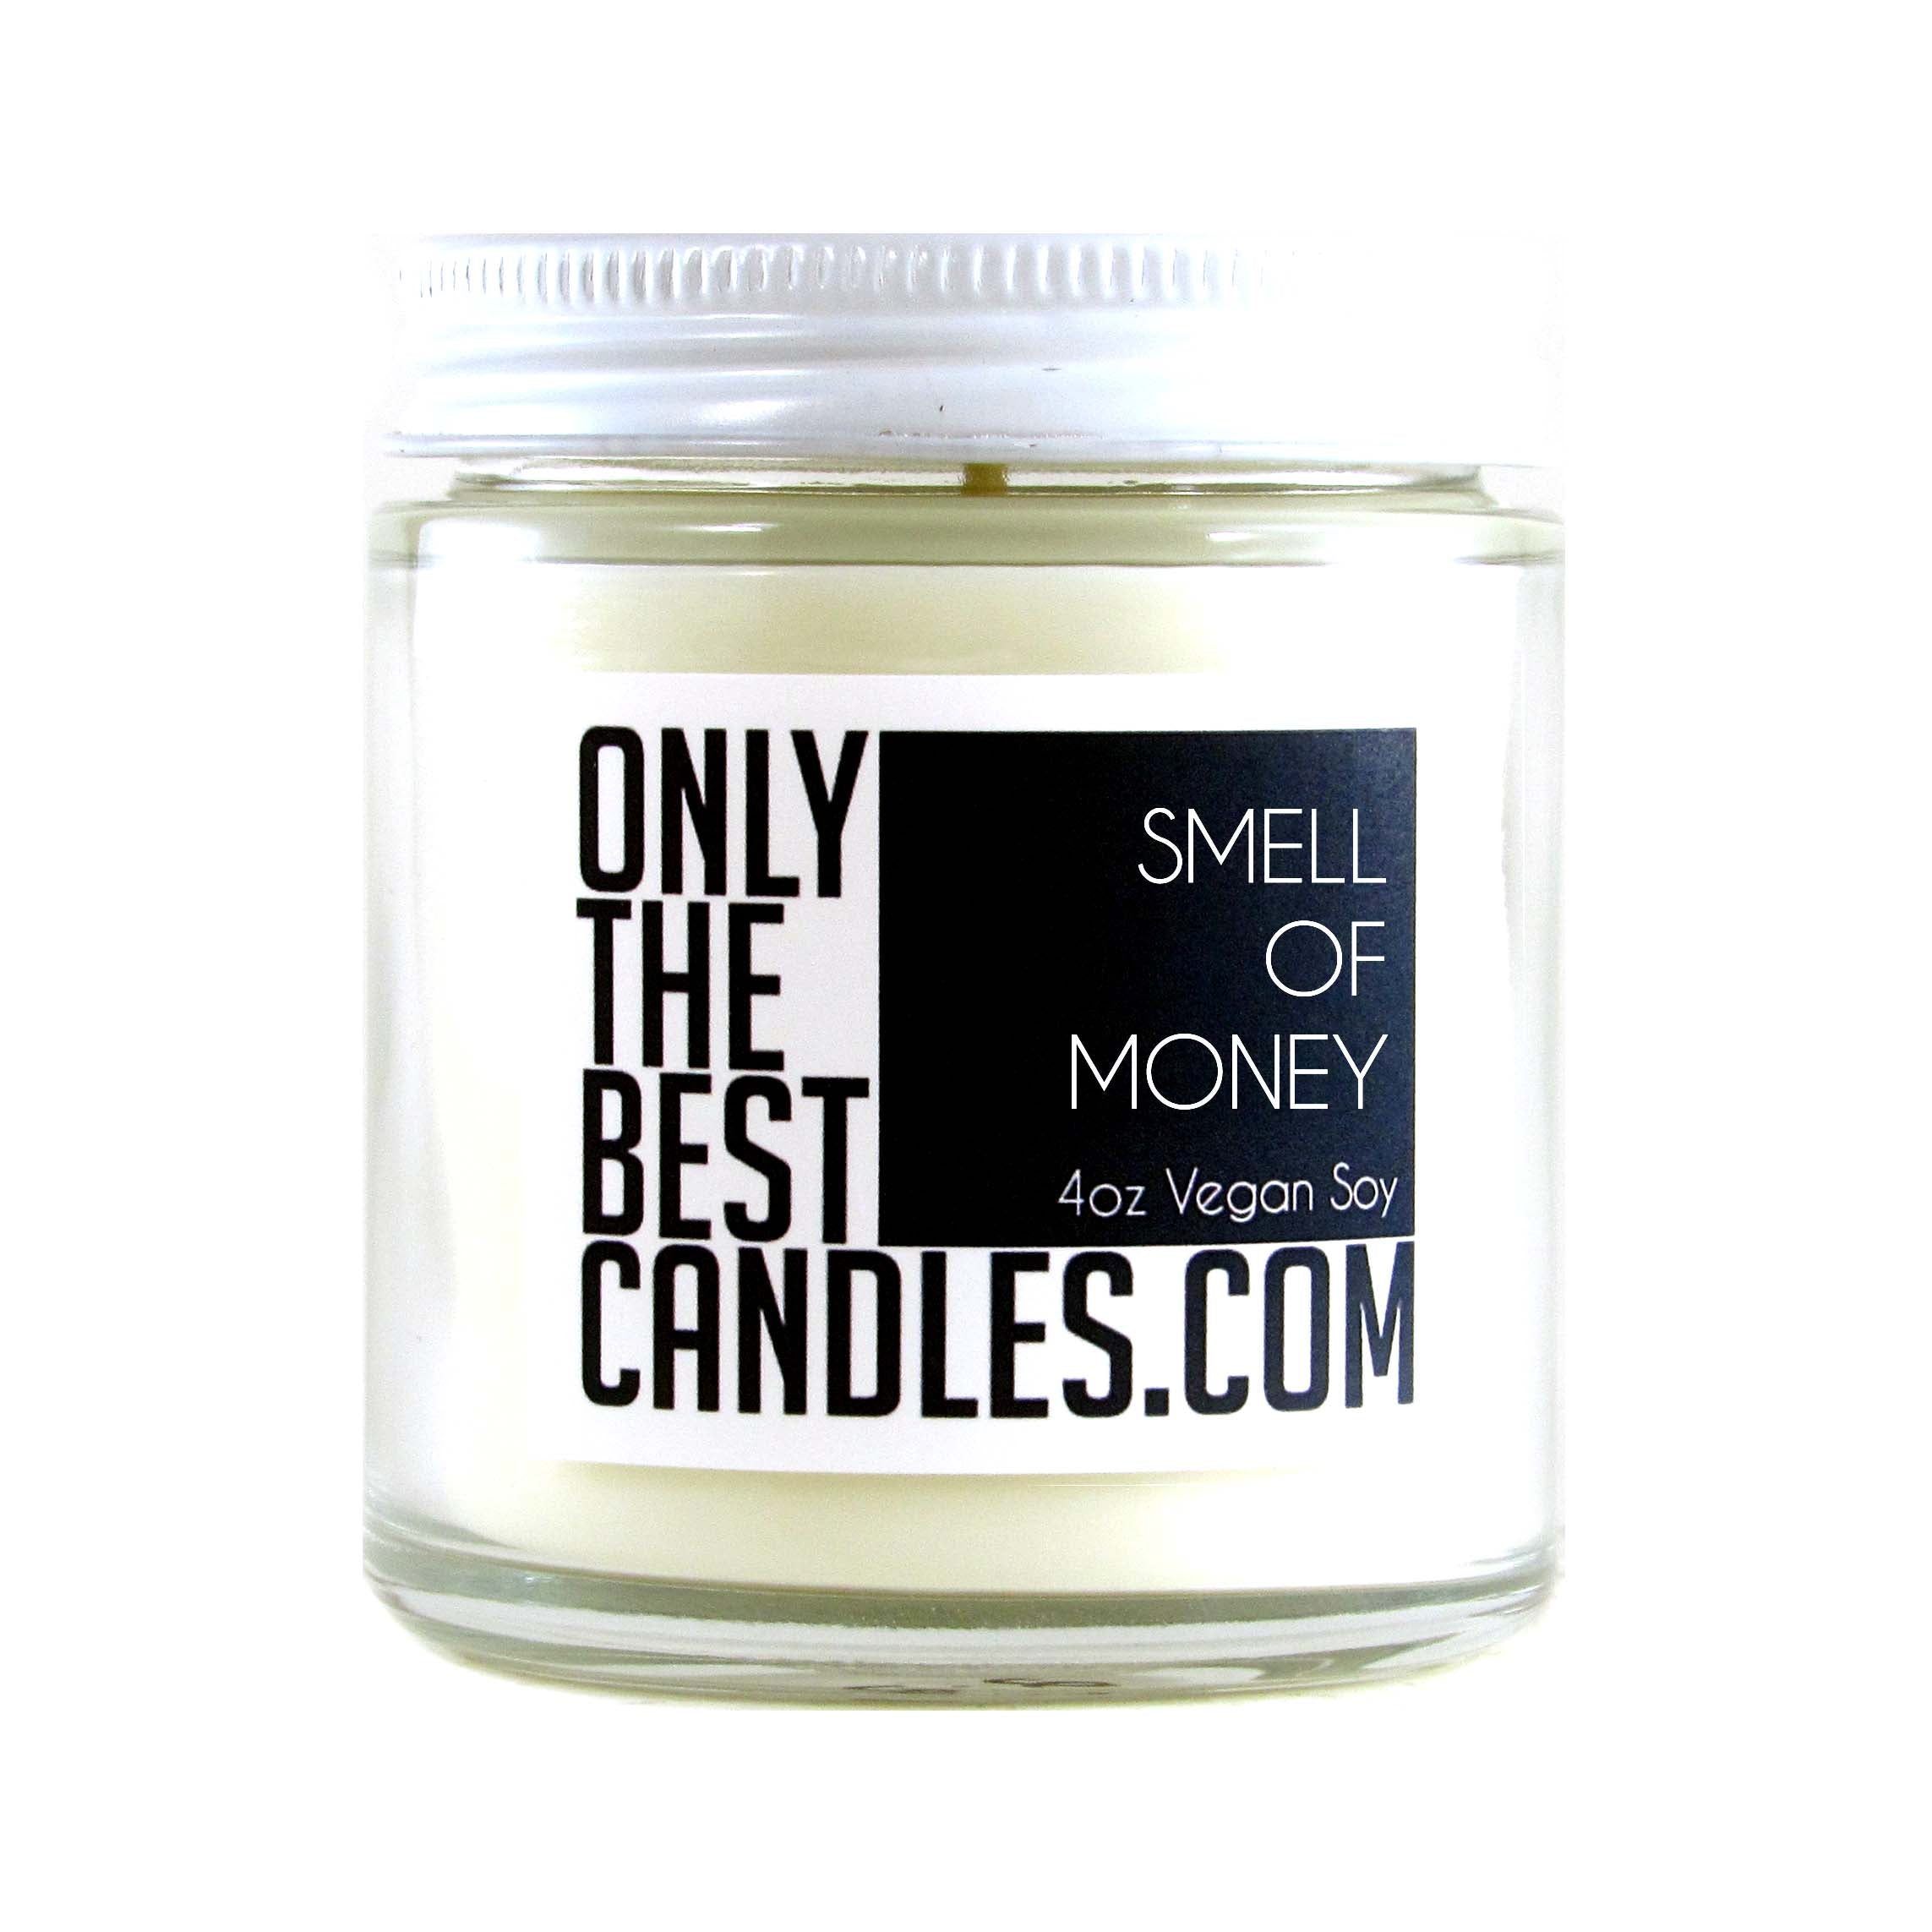 Smell of Money 4oz Candle